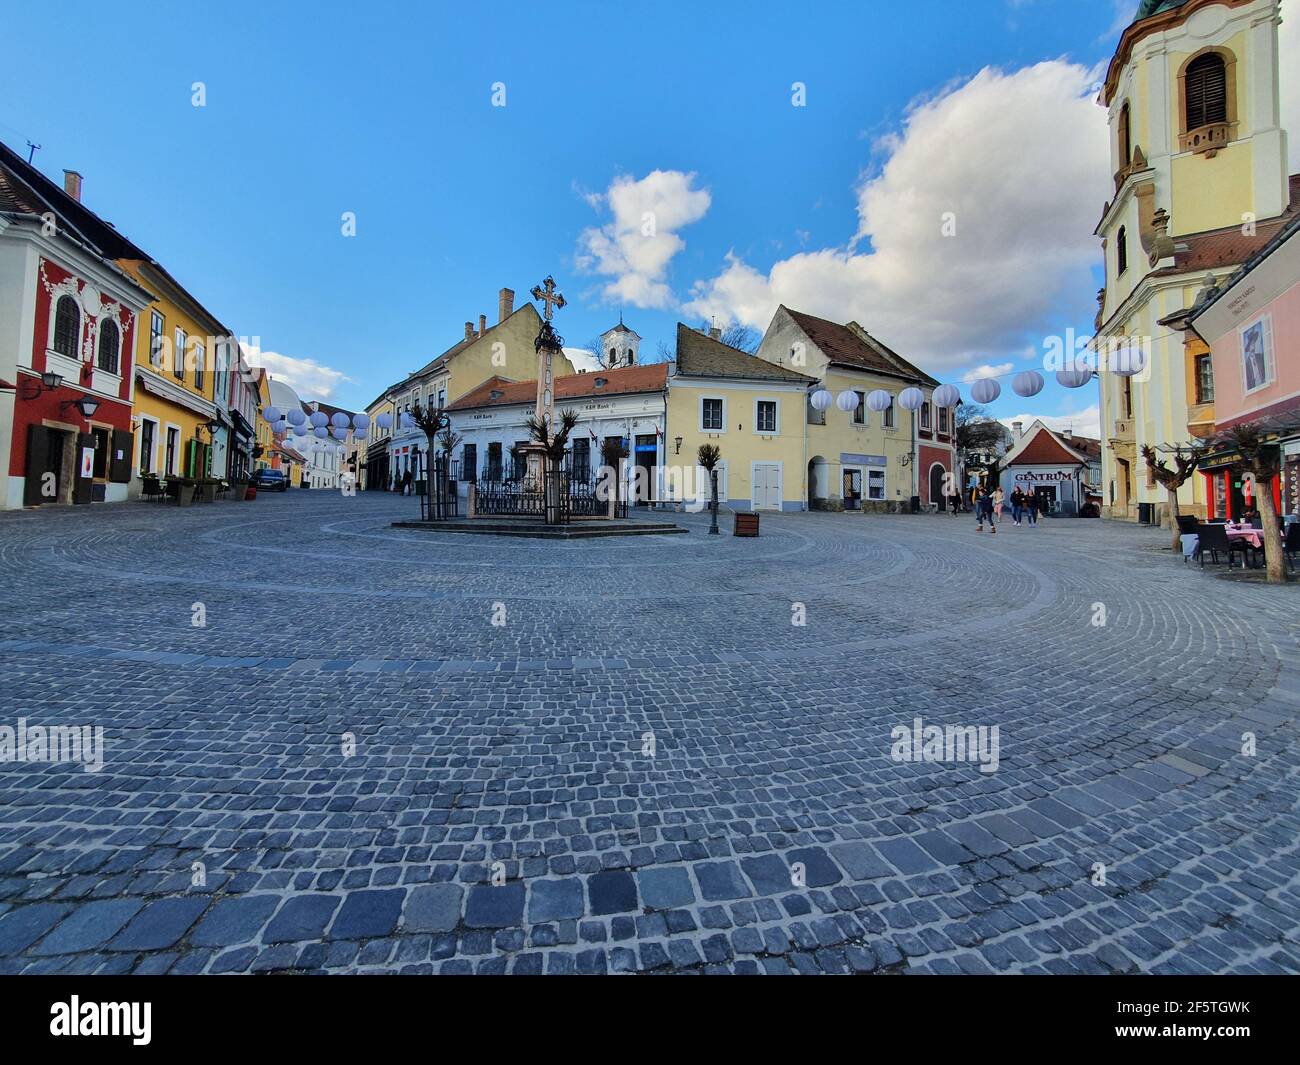 02.18.2020 - Szentendre, Hungary: is a riverside town in Pest County Stock Photo